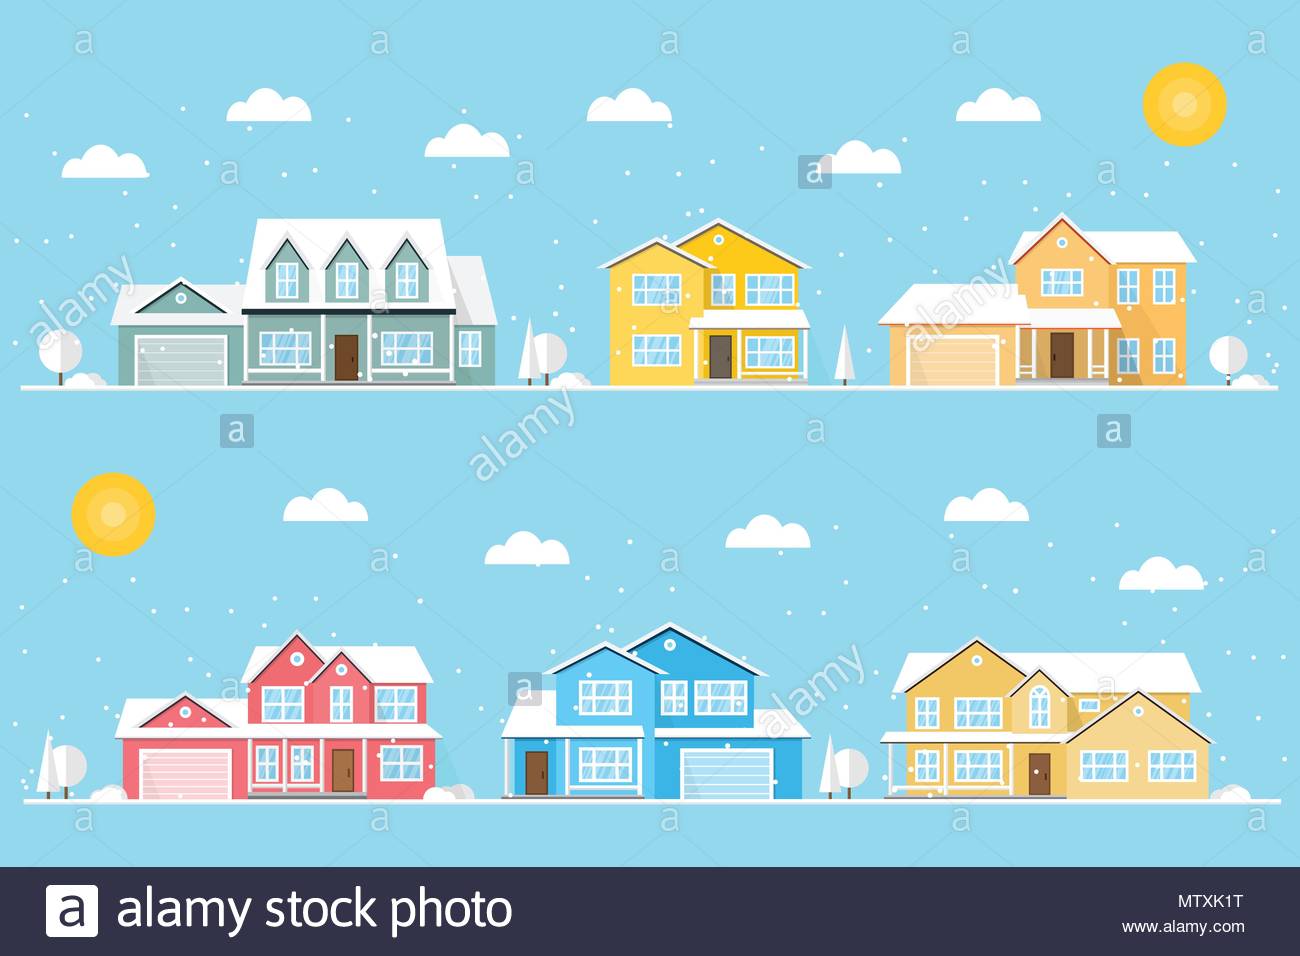 Neighborhood With Homes And Snowflakes Illustrated On The Blue